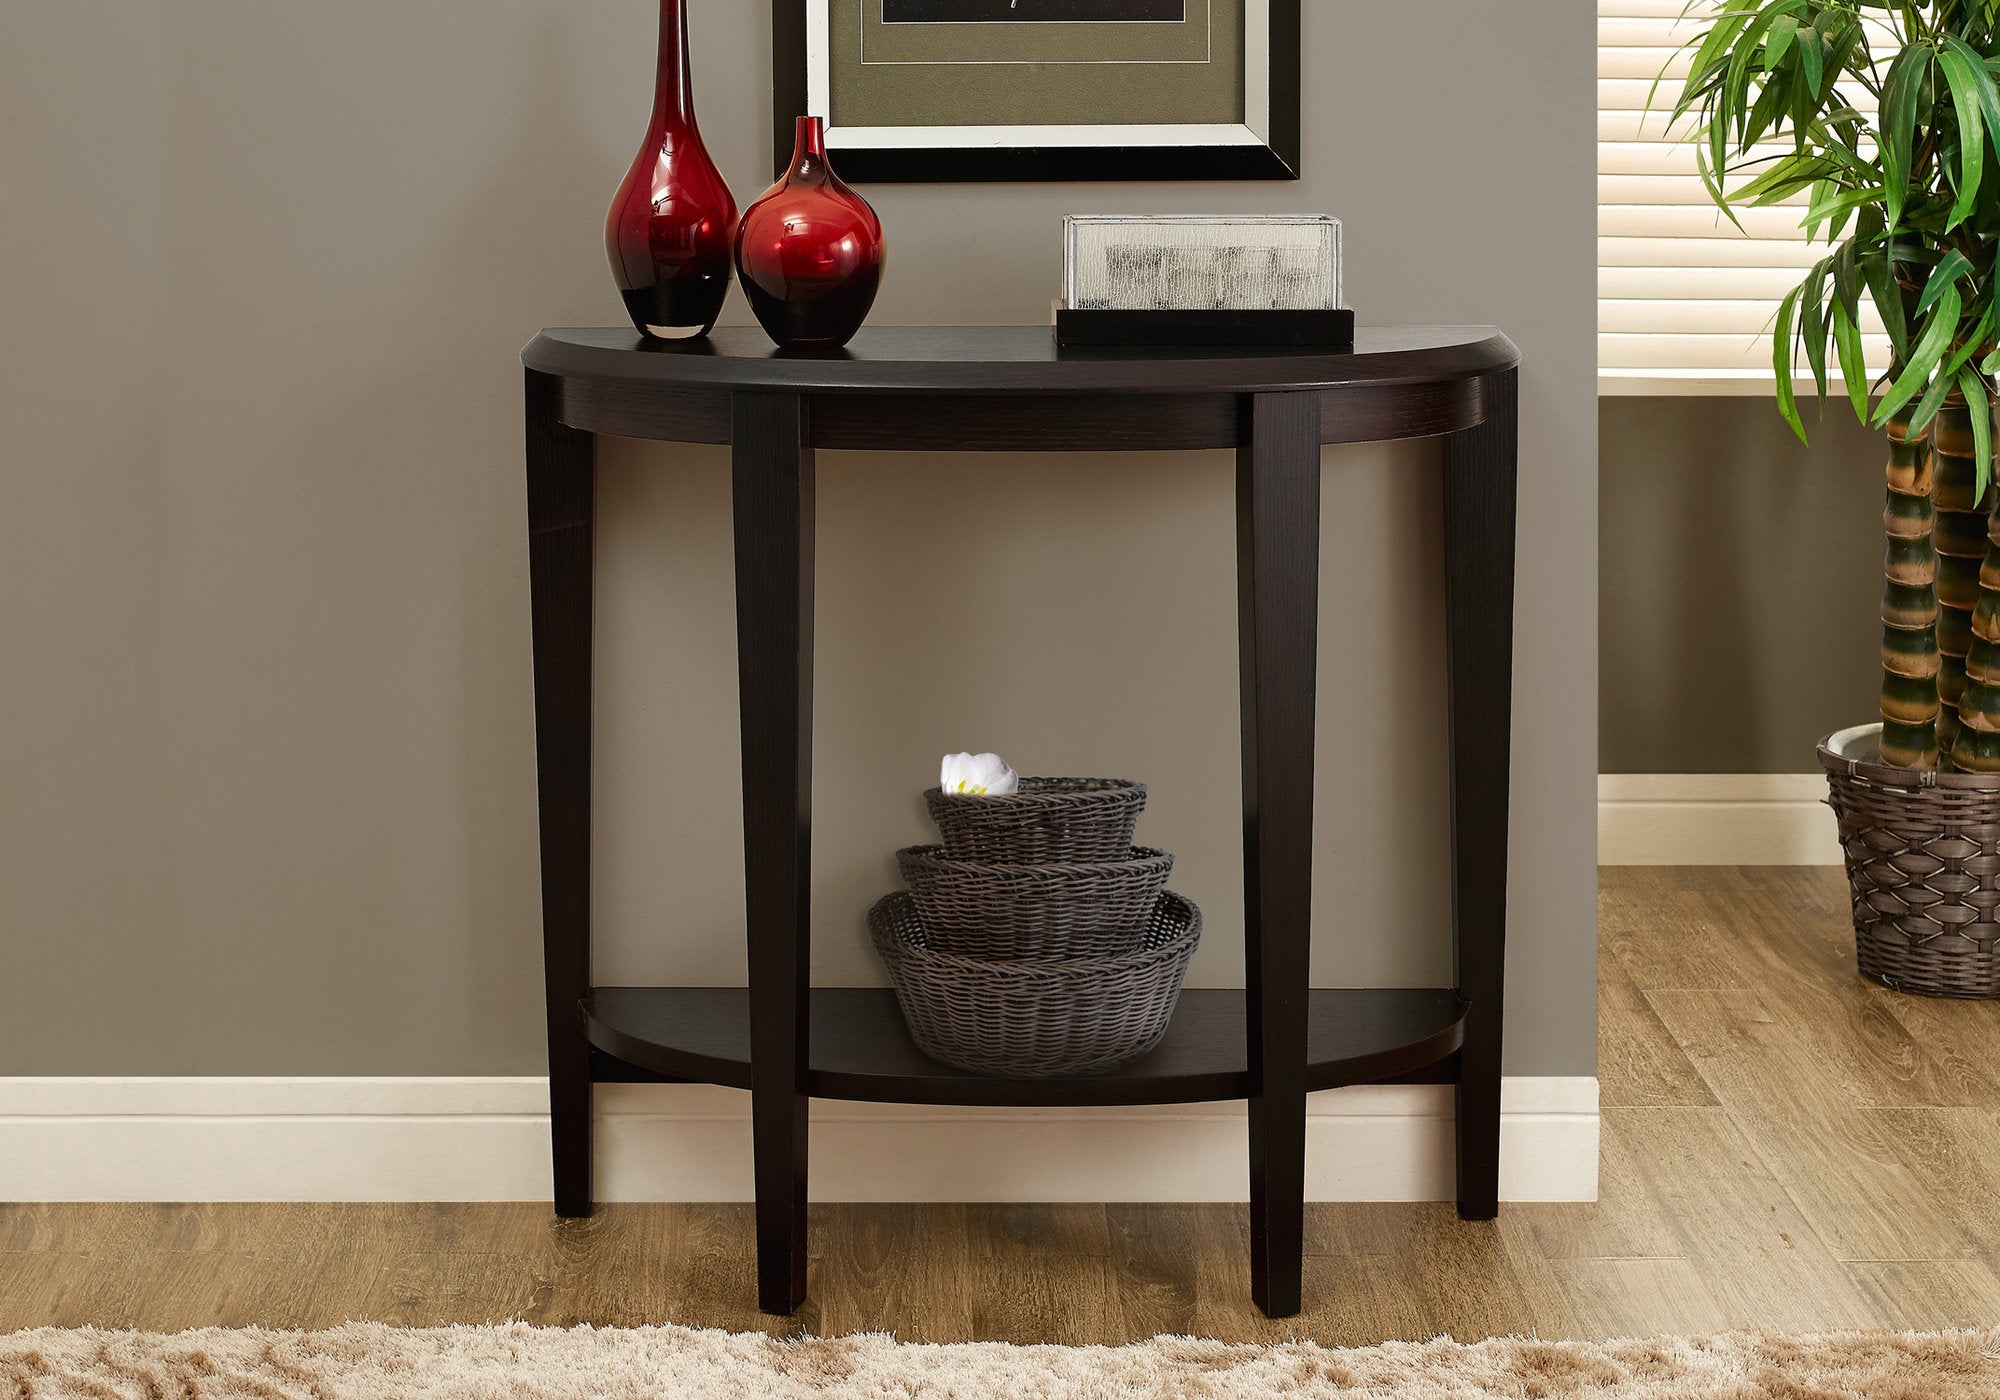 Demilune Espresso Accent Sofa Console Entryway Table With Shelf